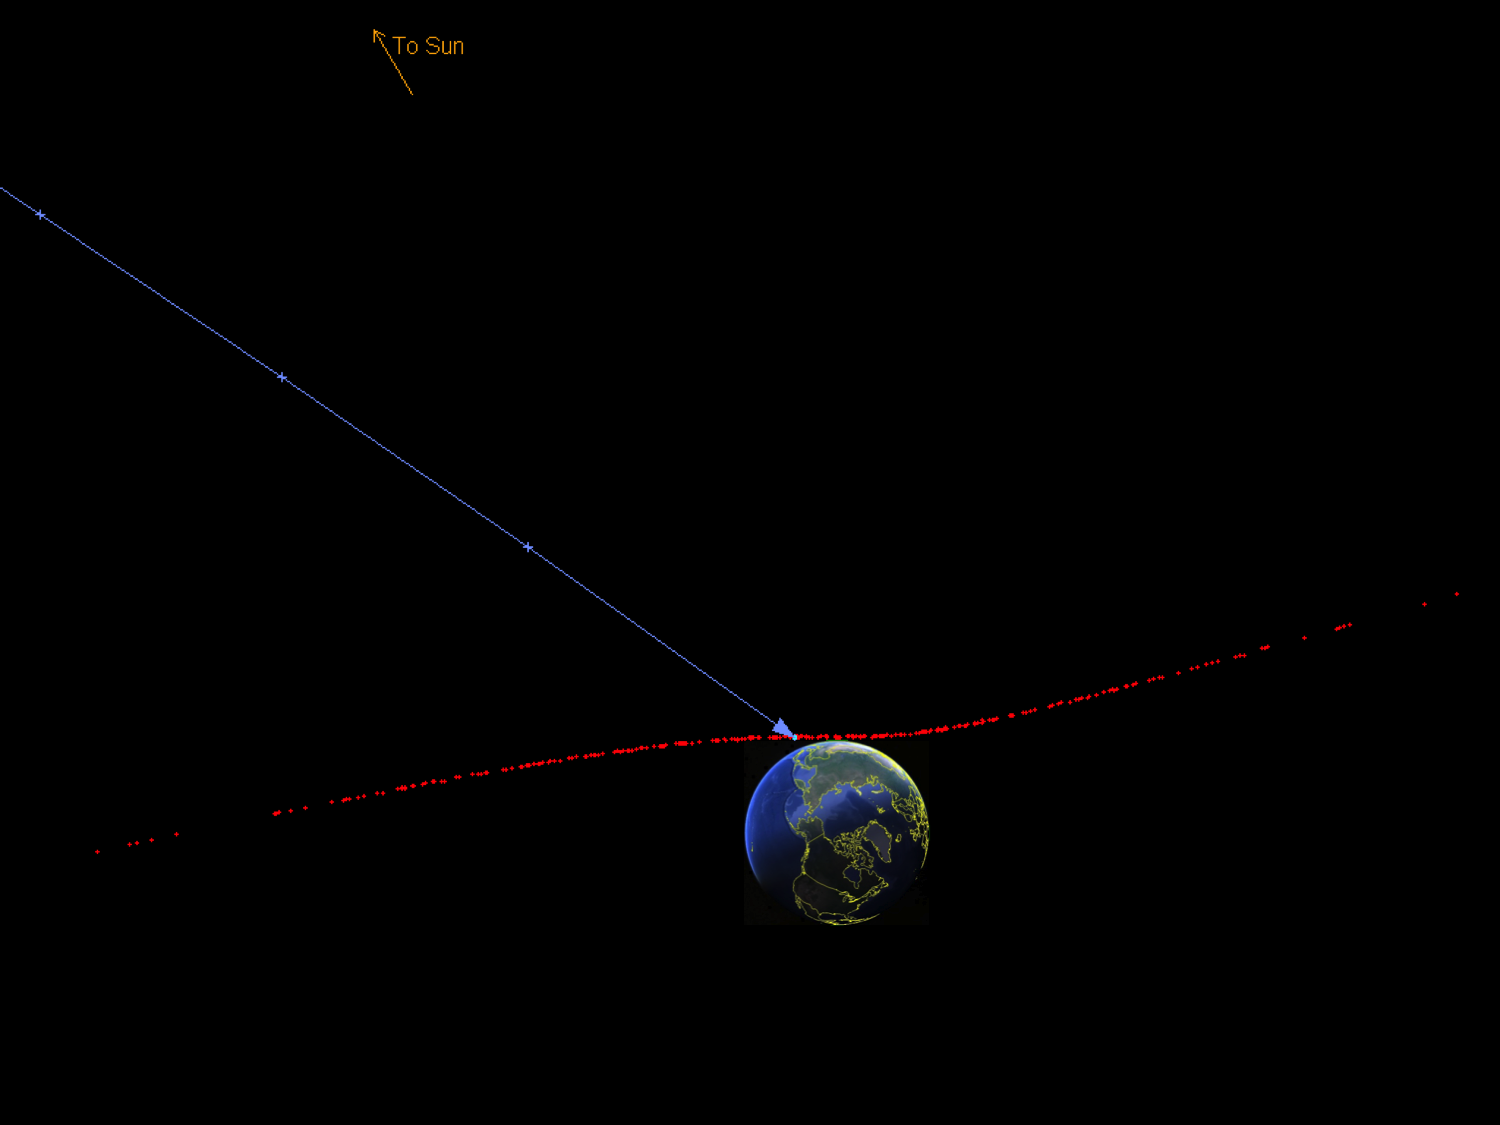 This diagram shows the possible positions of the asteroid as red dots (the uncertainty region) at the time the potential Earth impacts begin. The red dots align roughly along the heliocentric orbit of the asteroid, but relative to the Earth the red region moves in the direction indicated by the blue line. The blue line traces only the central point of the red region. Tick marks on the blue line are shown at one-hour intervals. Since the impact probability is 43%, that fraction of the red region will impact the Earth; the rest of the red points will pass safely by the Earth.